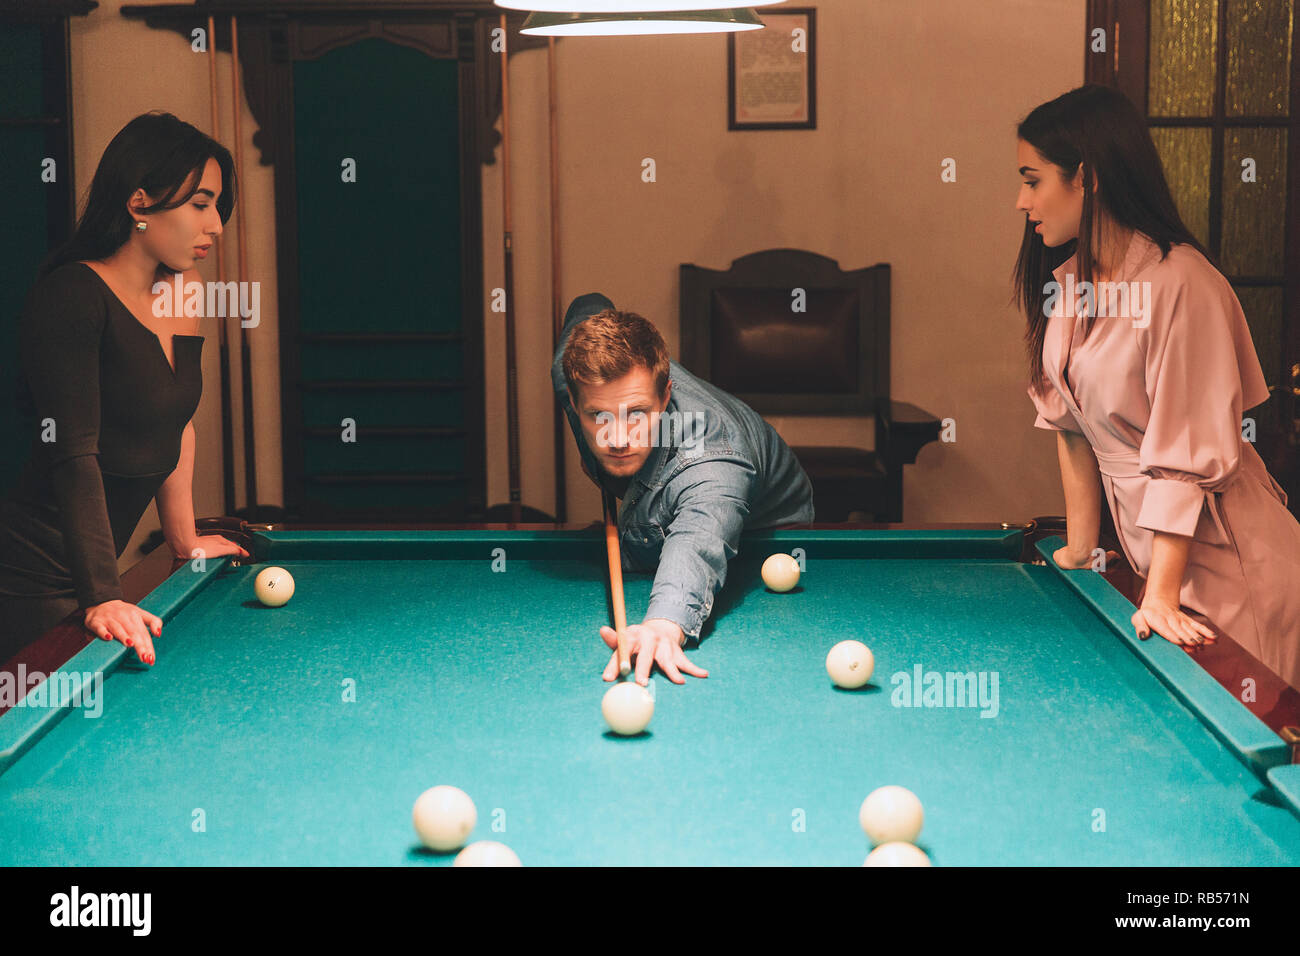 Young redhead player stand between two models. He aims into billiard ball. Young women stand and look at gamel. They lean to table Stock Photo